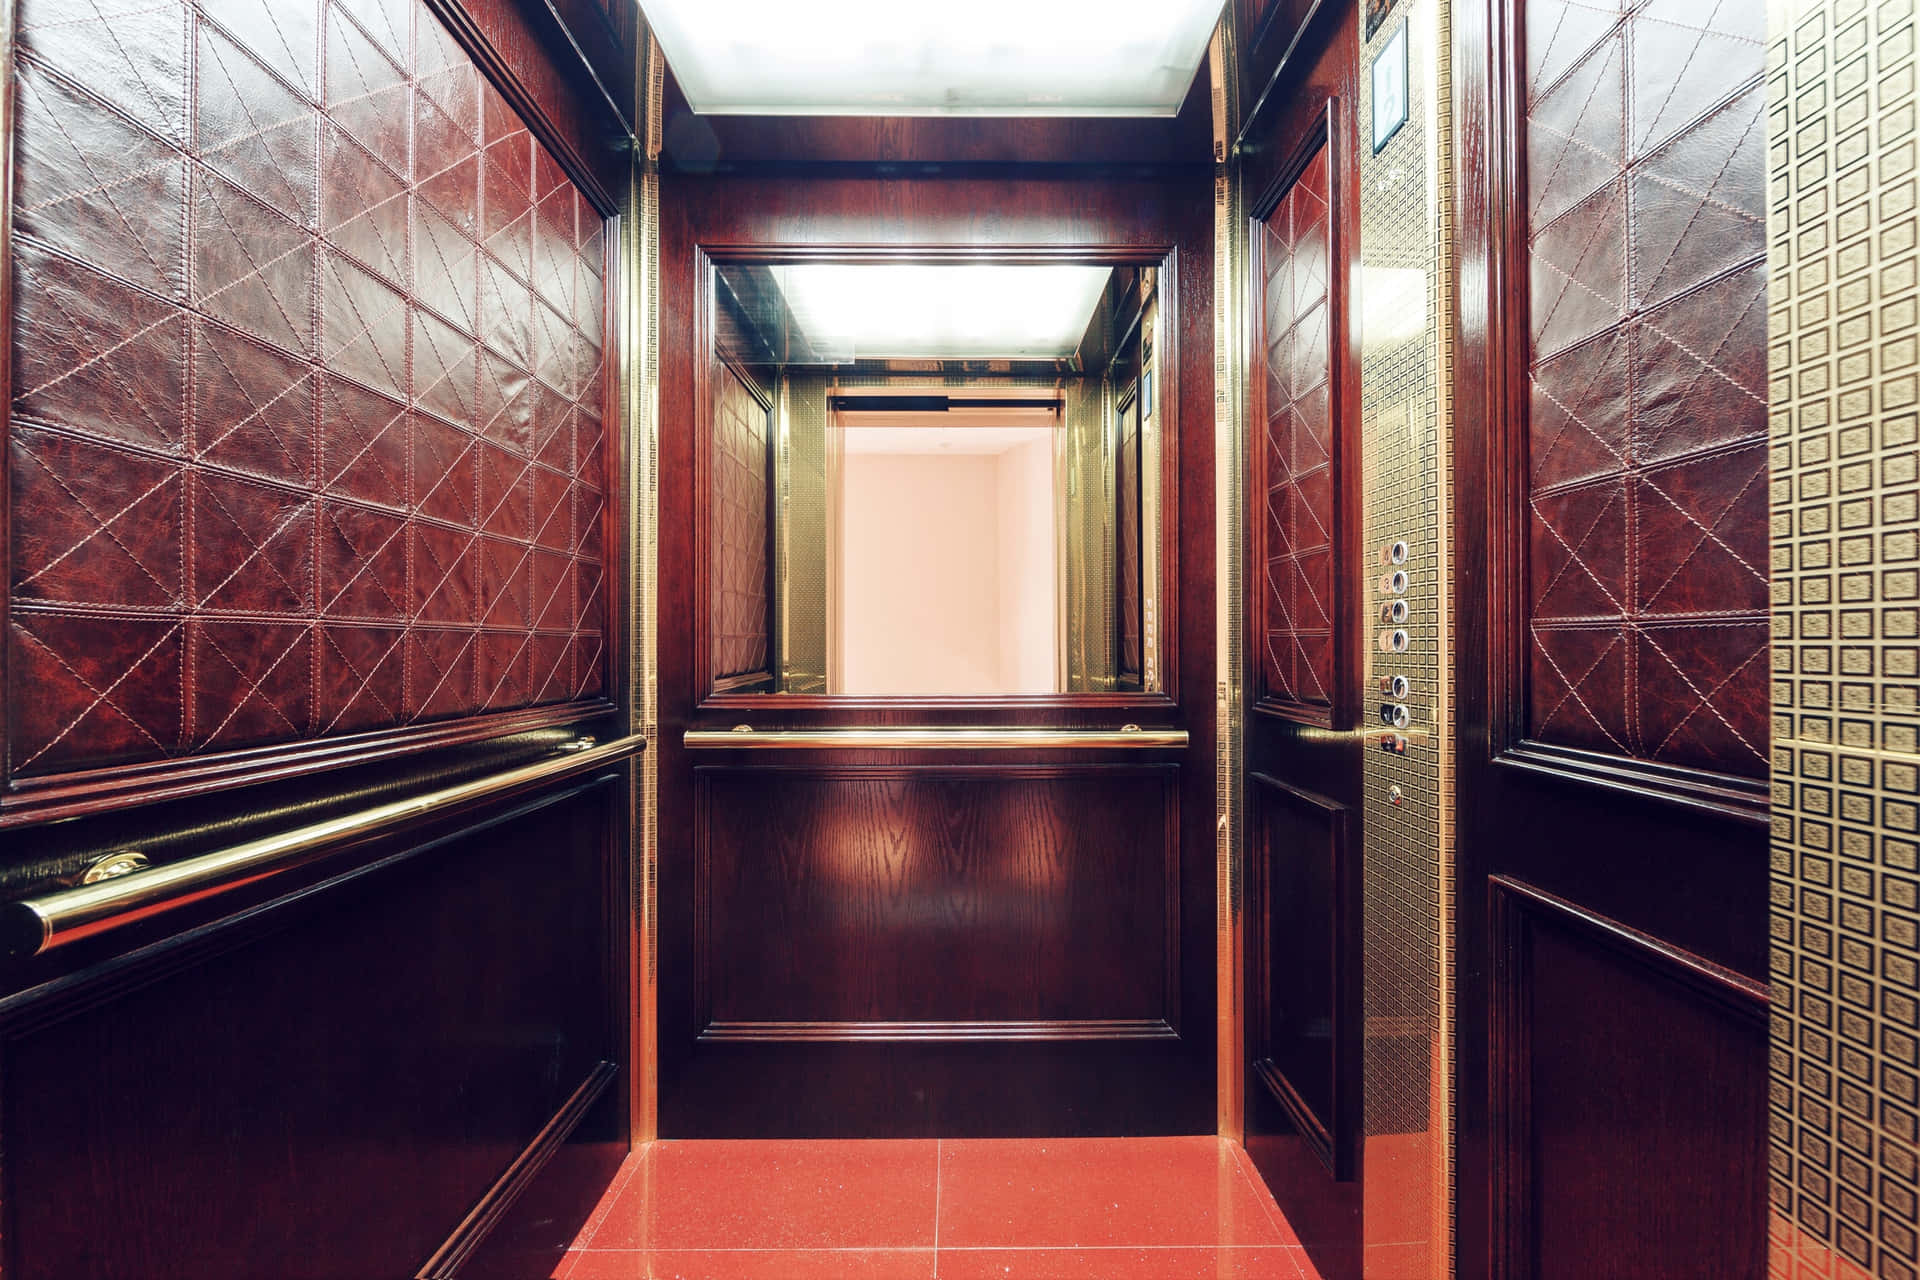 A Wooden Elevator With Red Tile